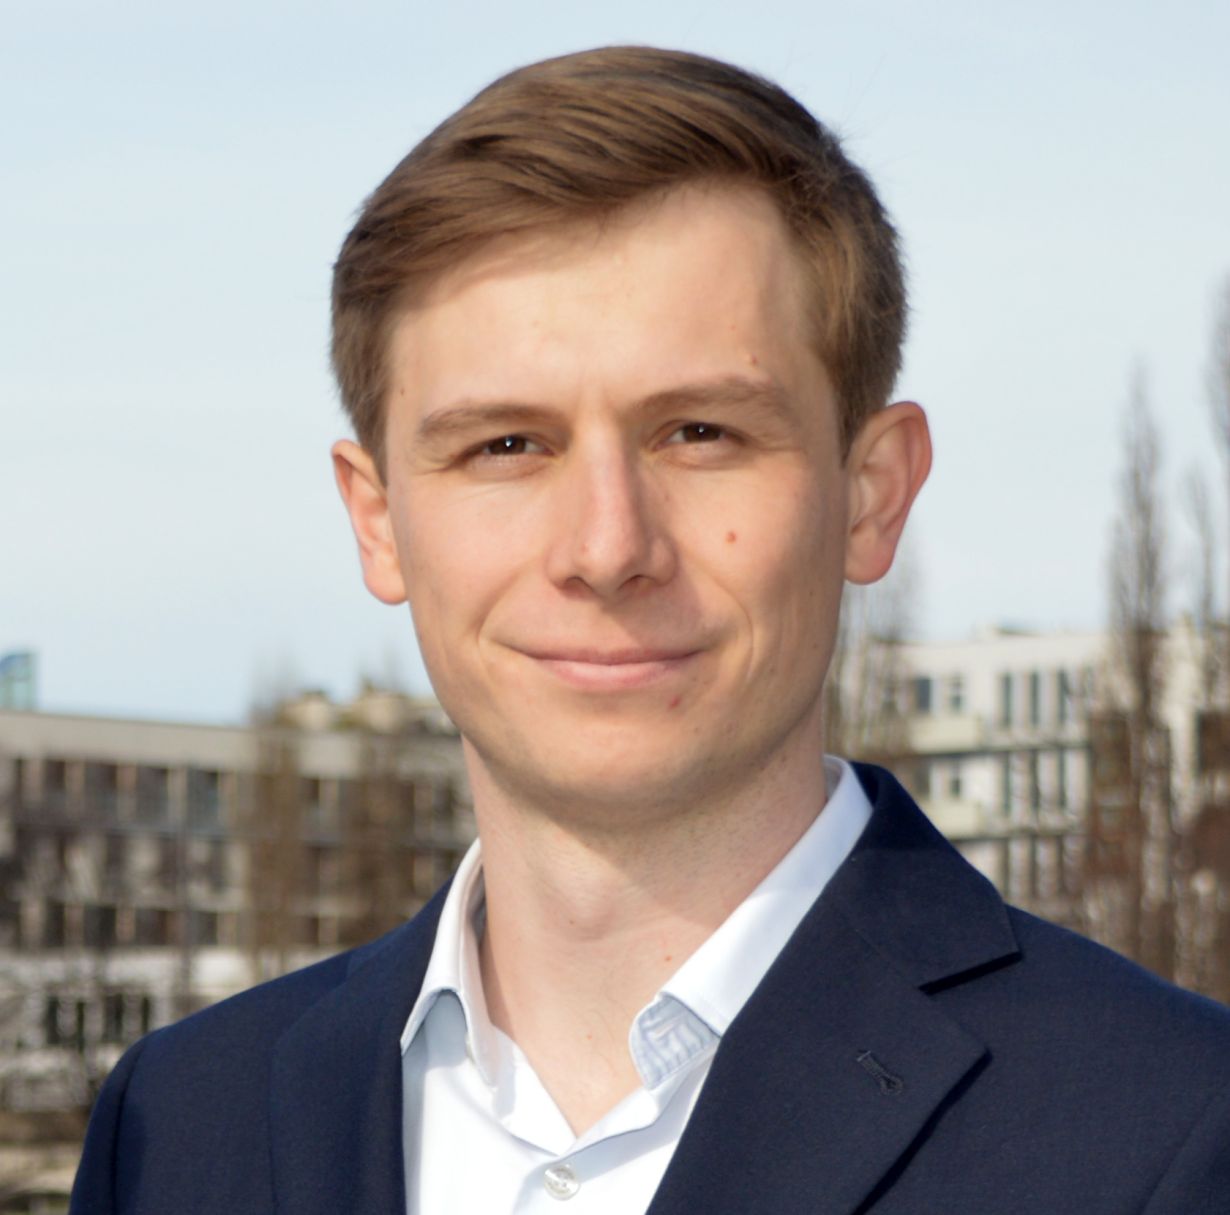 Pascal Stichler studied business engineering at KIT and established the transaction marketplace “Carl” for sales of private companies. (Photo: Carl Finance GmbH)